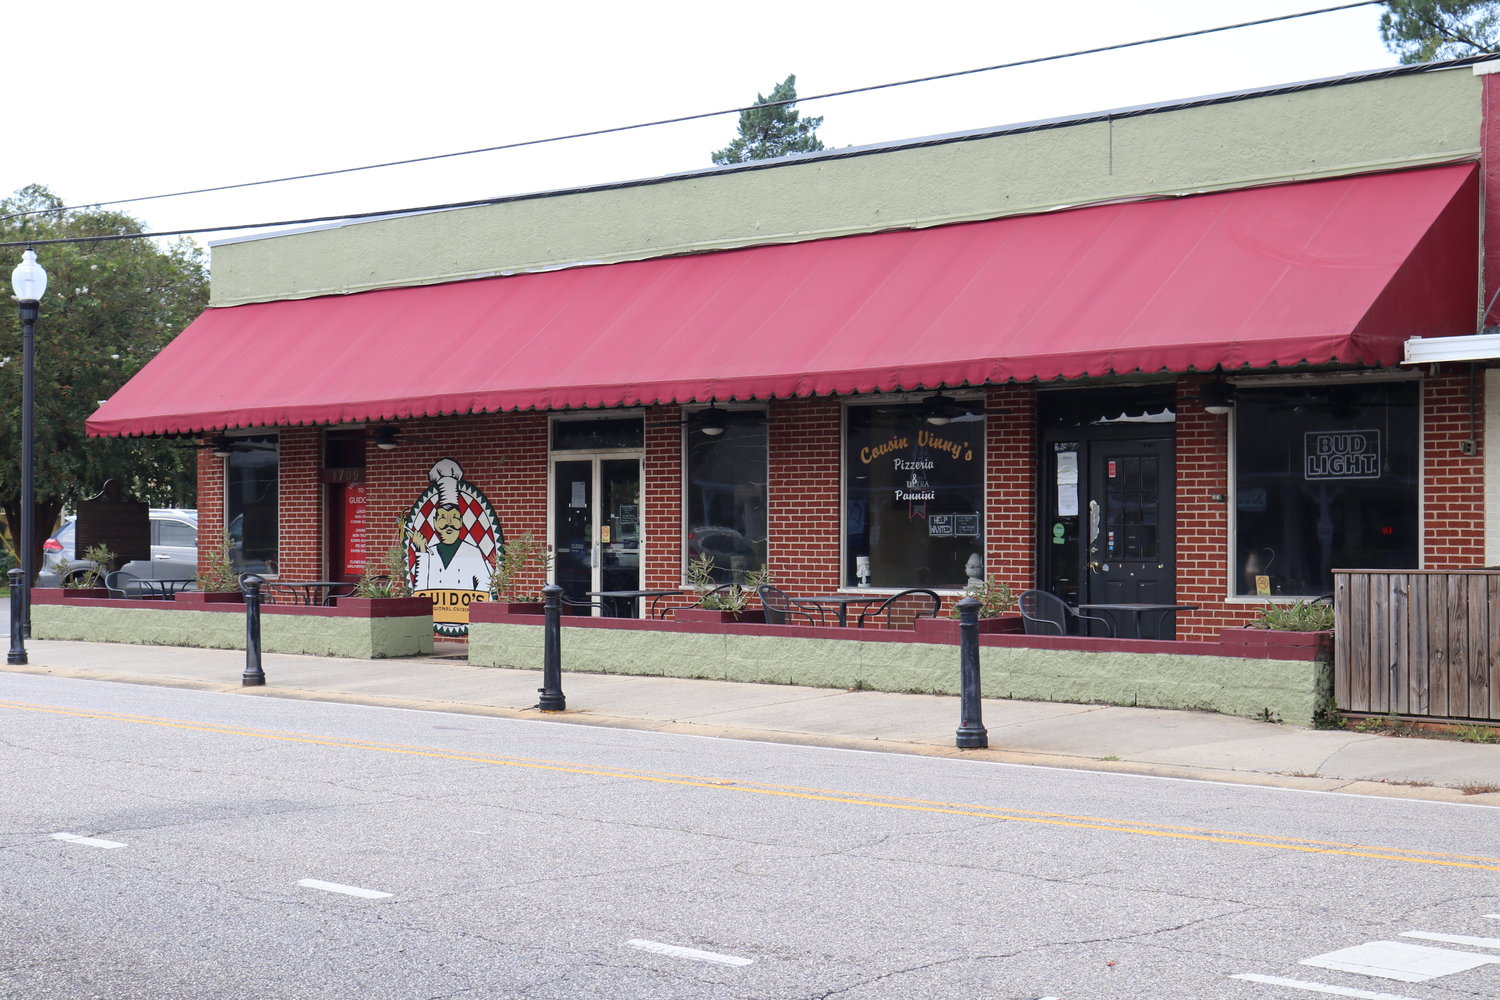 Guido's and Cousin Vinny's restaurants in downtown Daphne have been closed under a court order due to failure to pay more than $33,000 in county sales taxes.